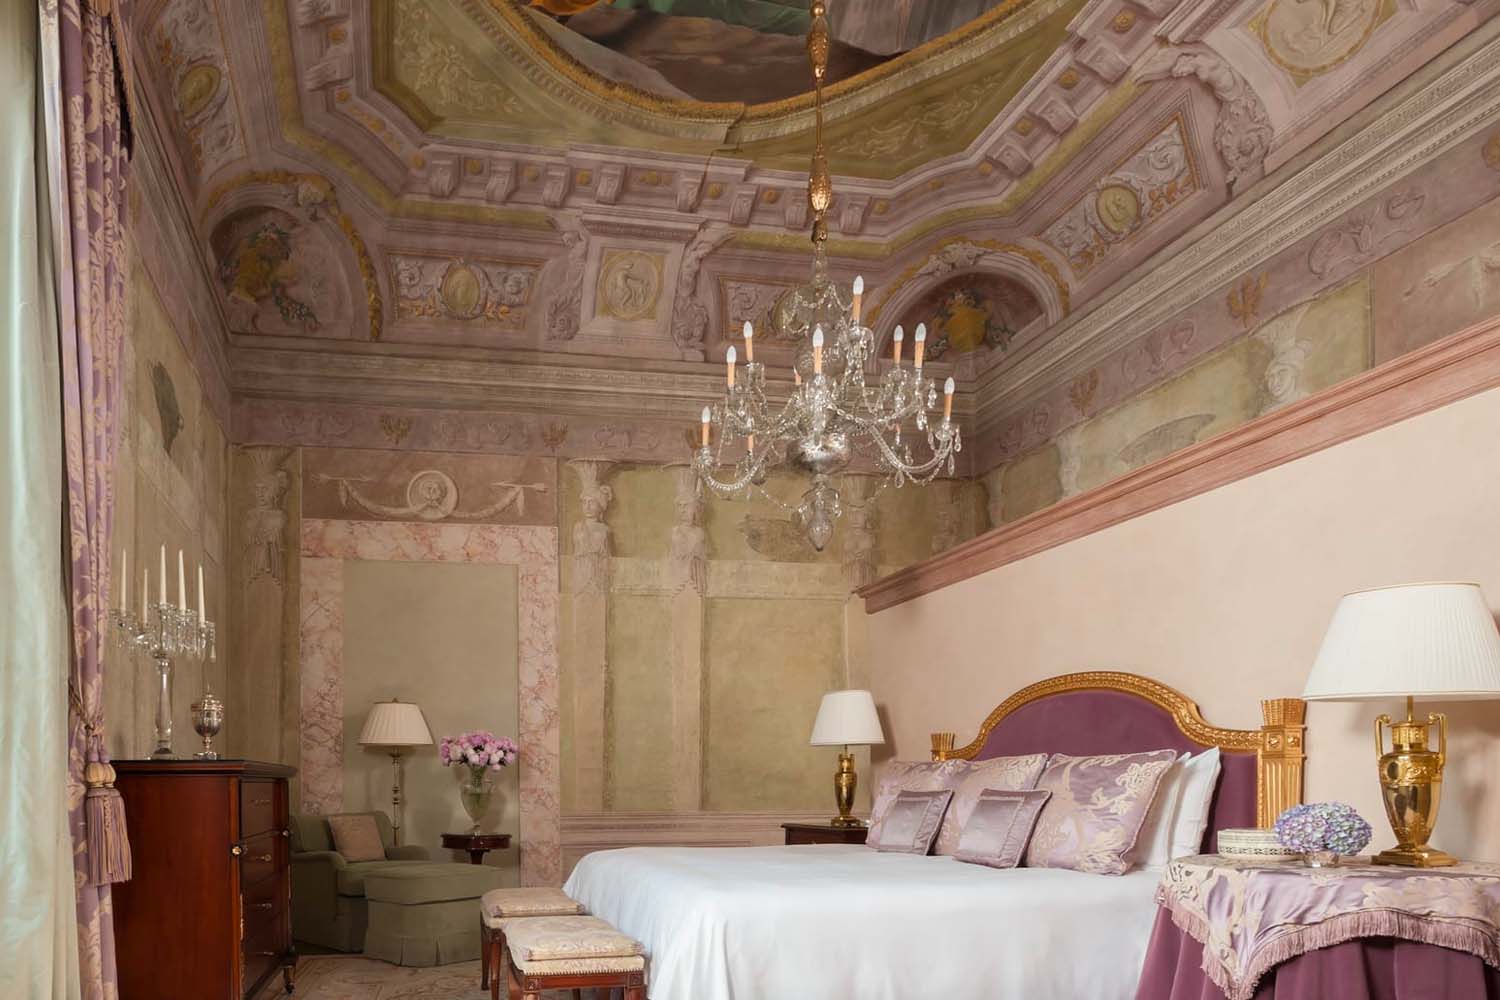 Views of the Giardino del Borgo complete with frescoed vaulted ceilings in the Fresco Executive Suite